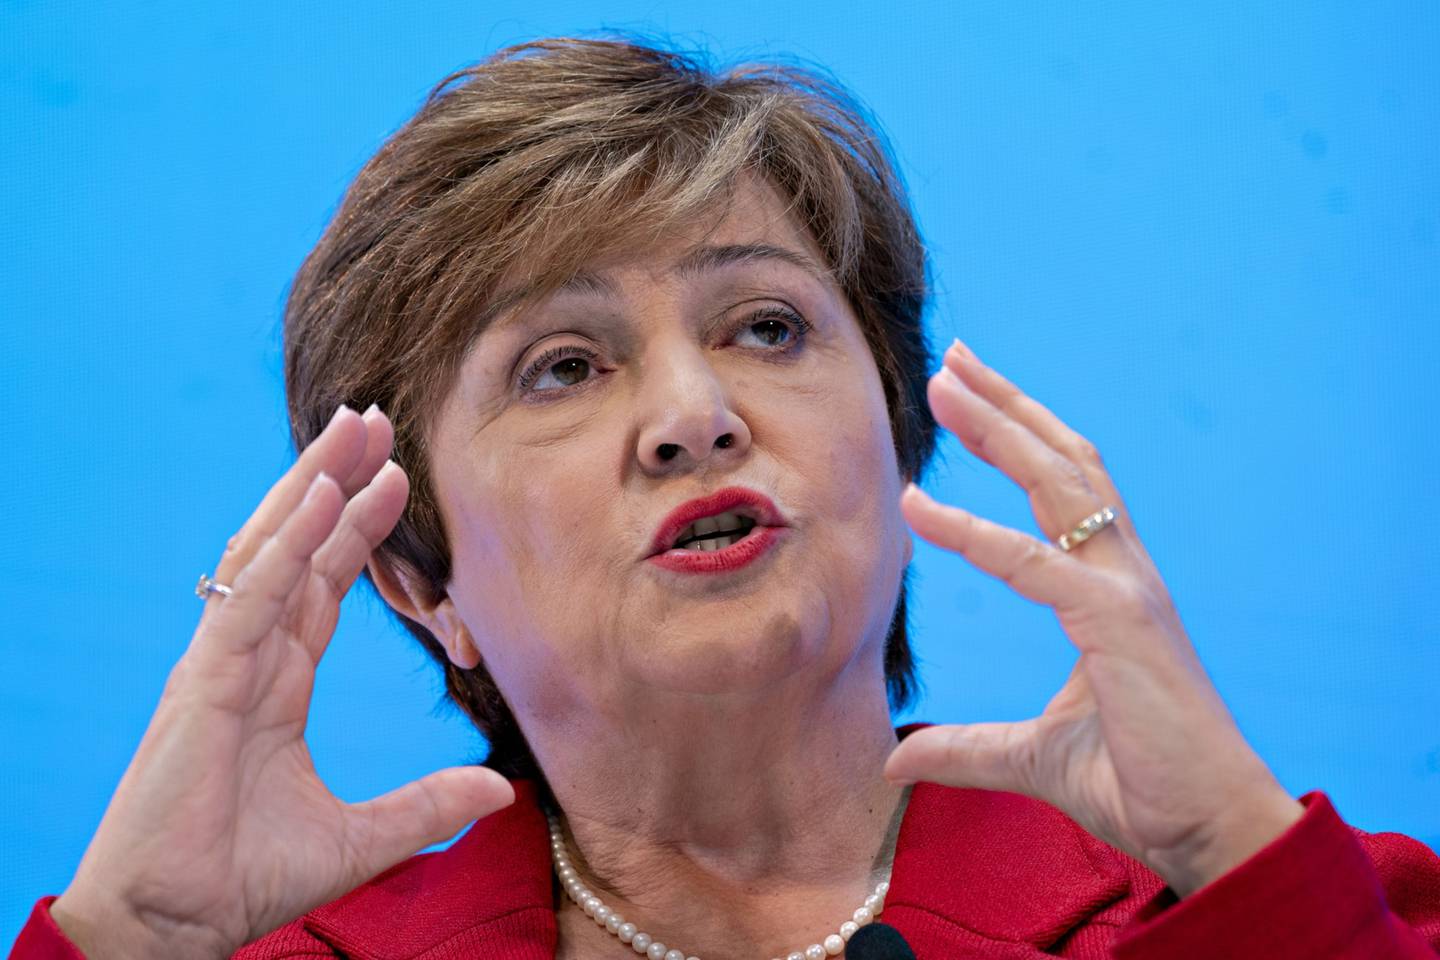 Kristalina Georgieva, managing director of the International Monetary Fund (IMF), speaks during a discussion ahead of the IMF and World Bank Group Annual Meetings in Washington, D.C., U.S., on Tuesday, Oct. 8, 2019. Georgieva, in her first major address as head of the IMF, painted a downbeat picture of the world economy and said a more severe slowdown could require governments to coordinate fiscal-stimulus measures.